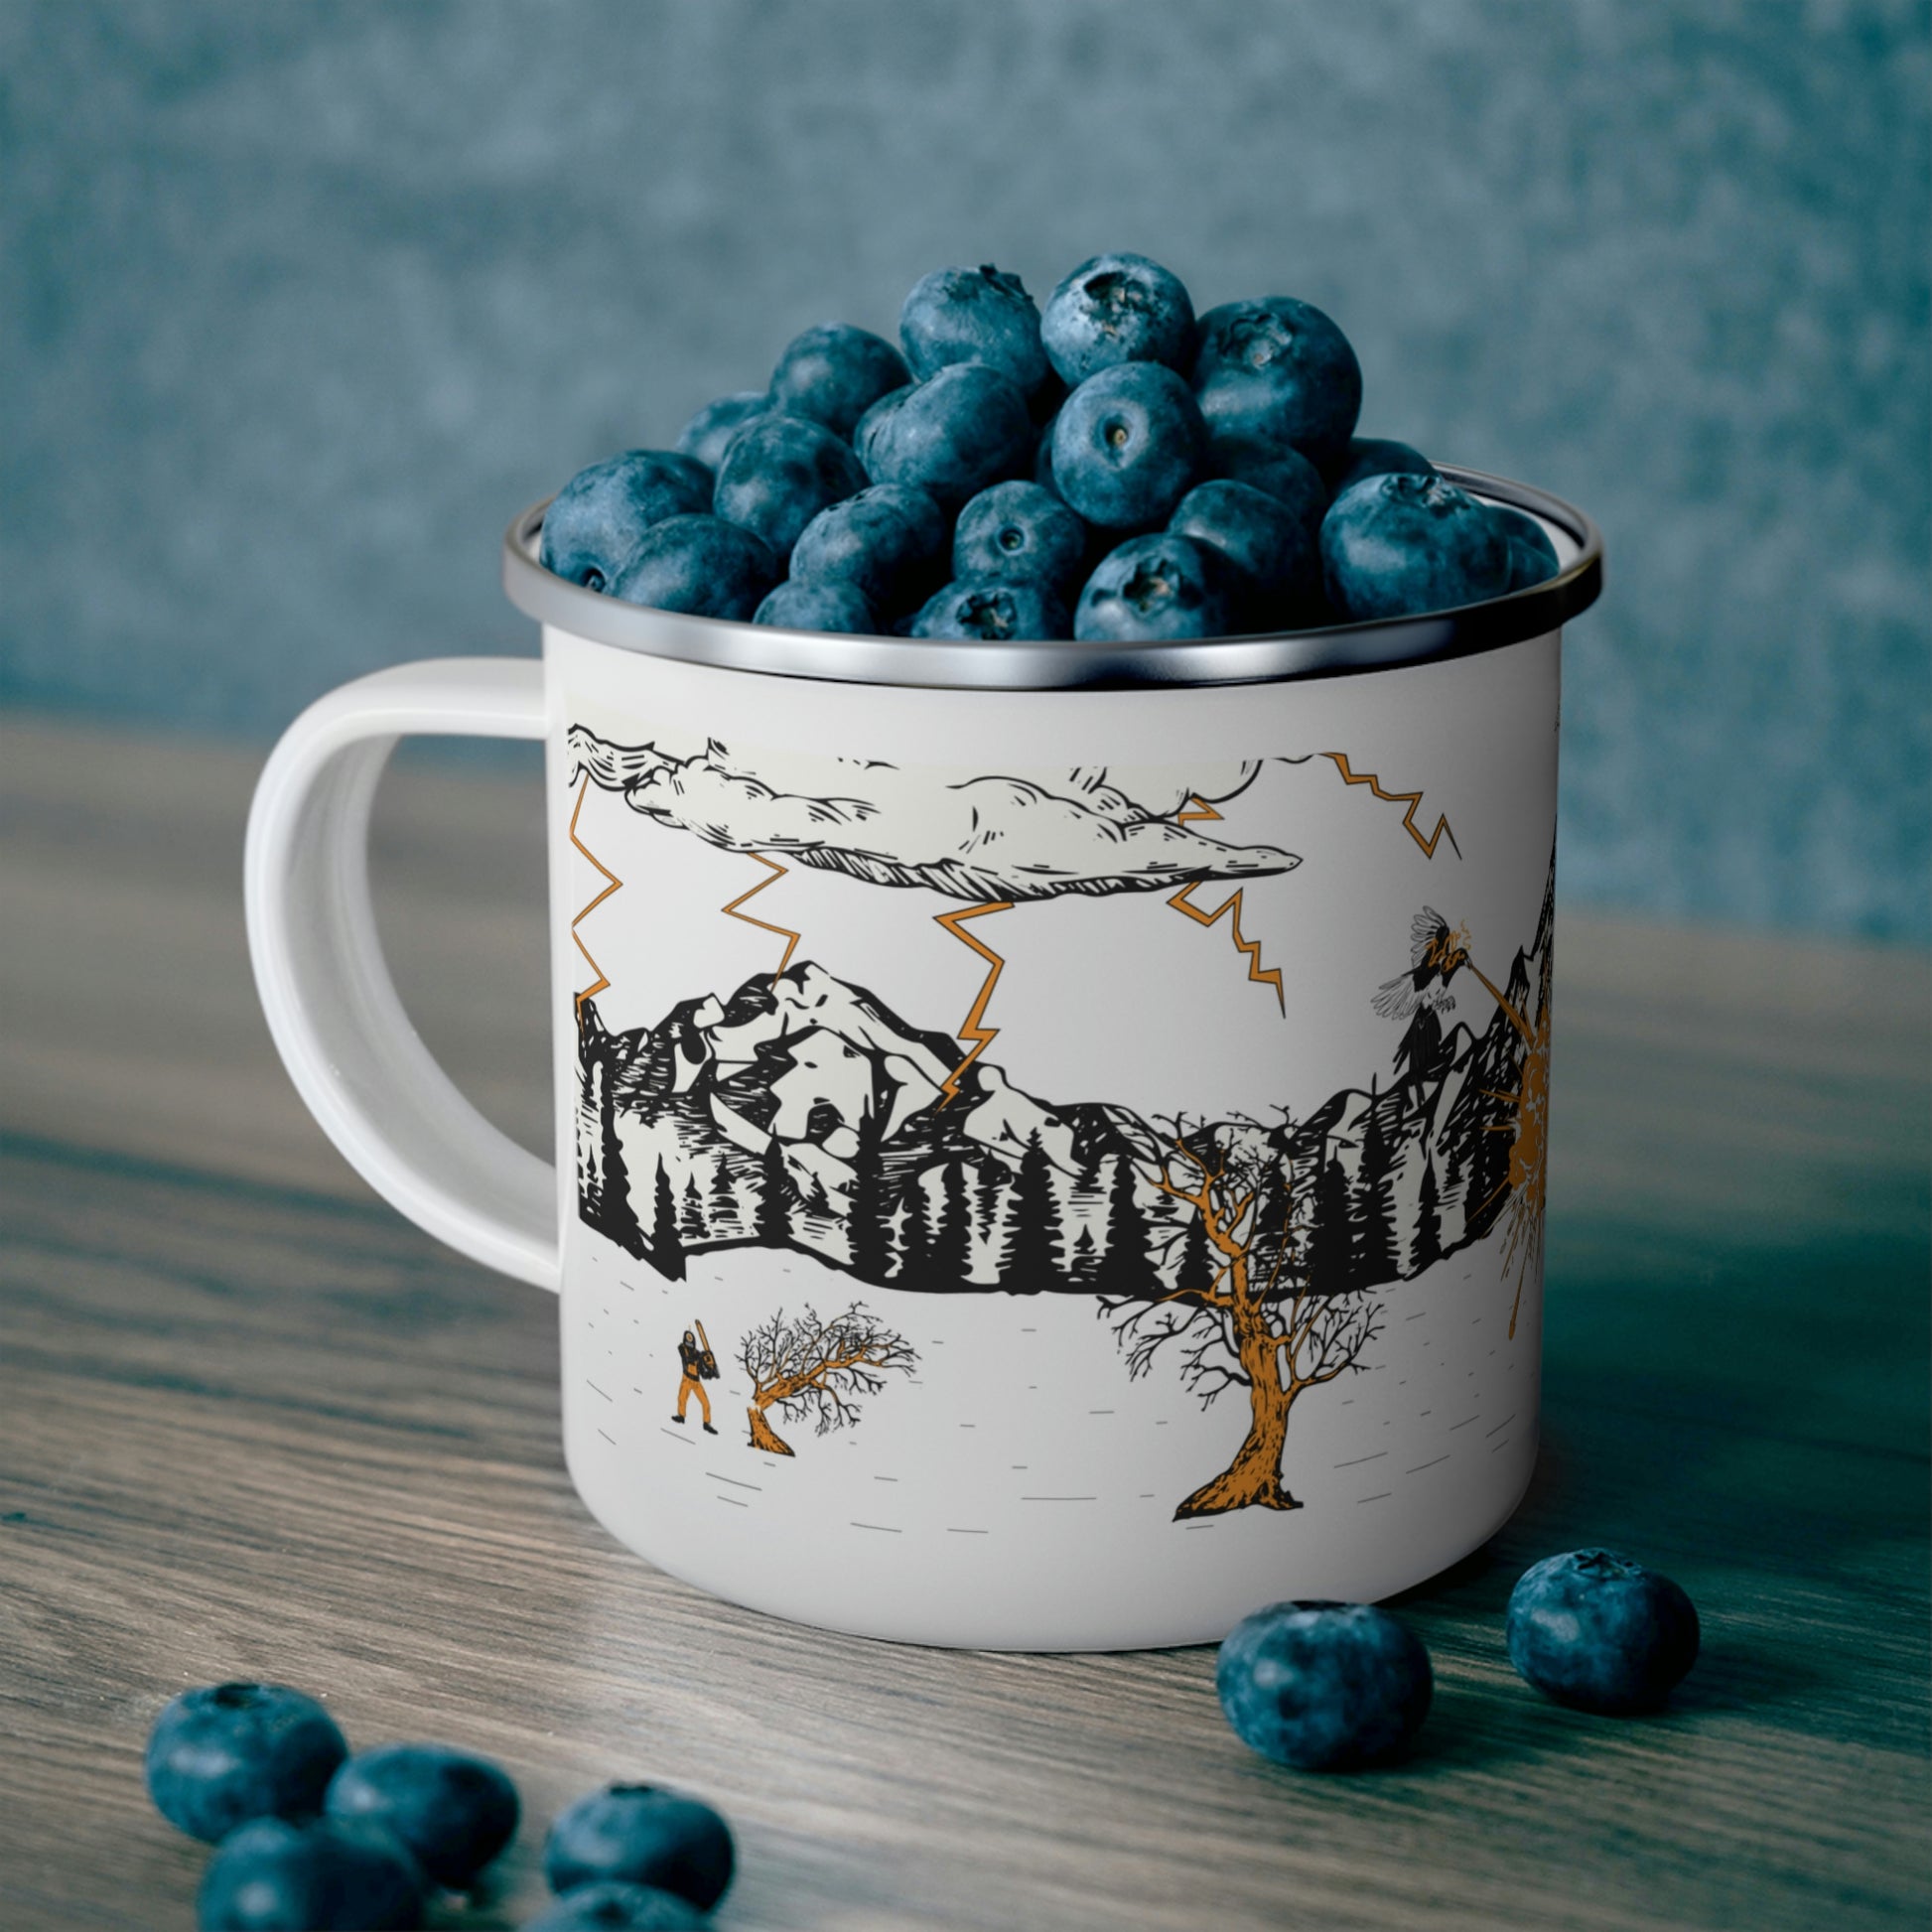 repeak energy camping mug, side angle filled with blueberries